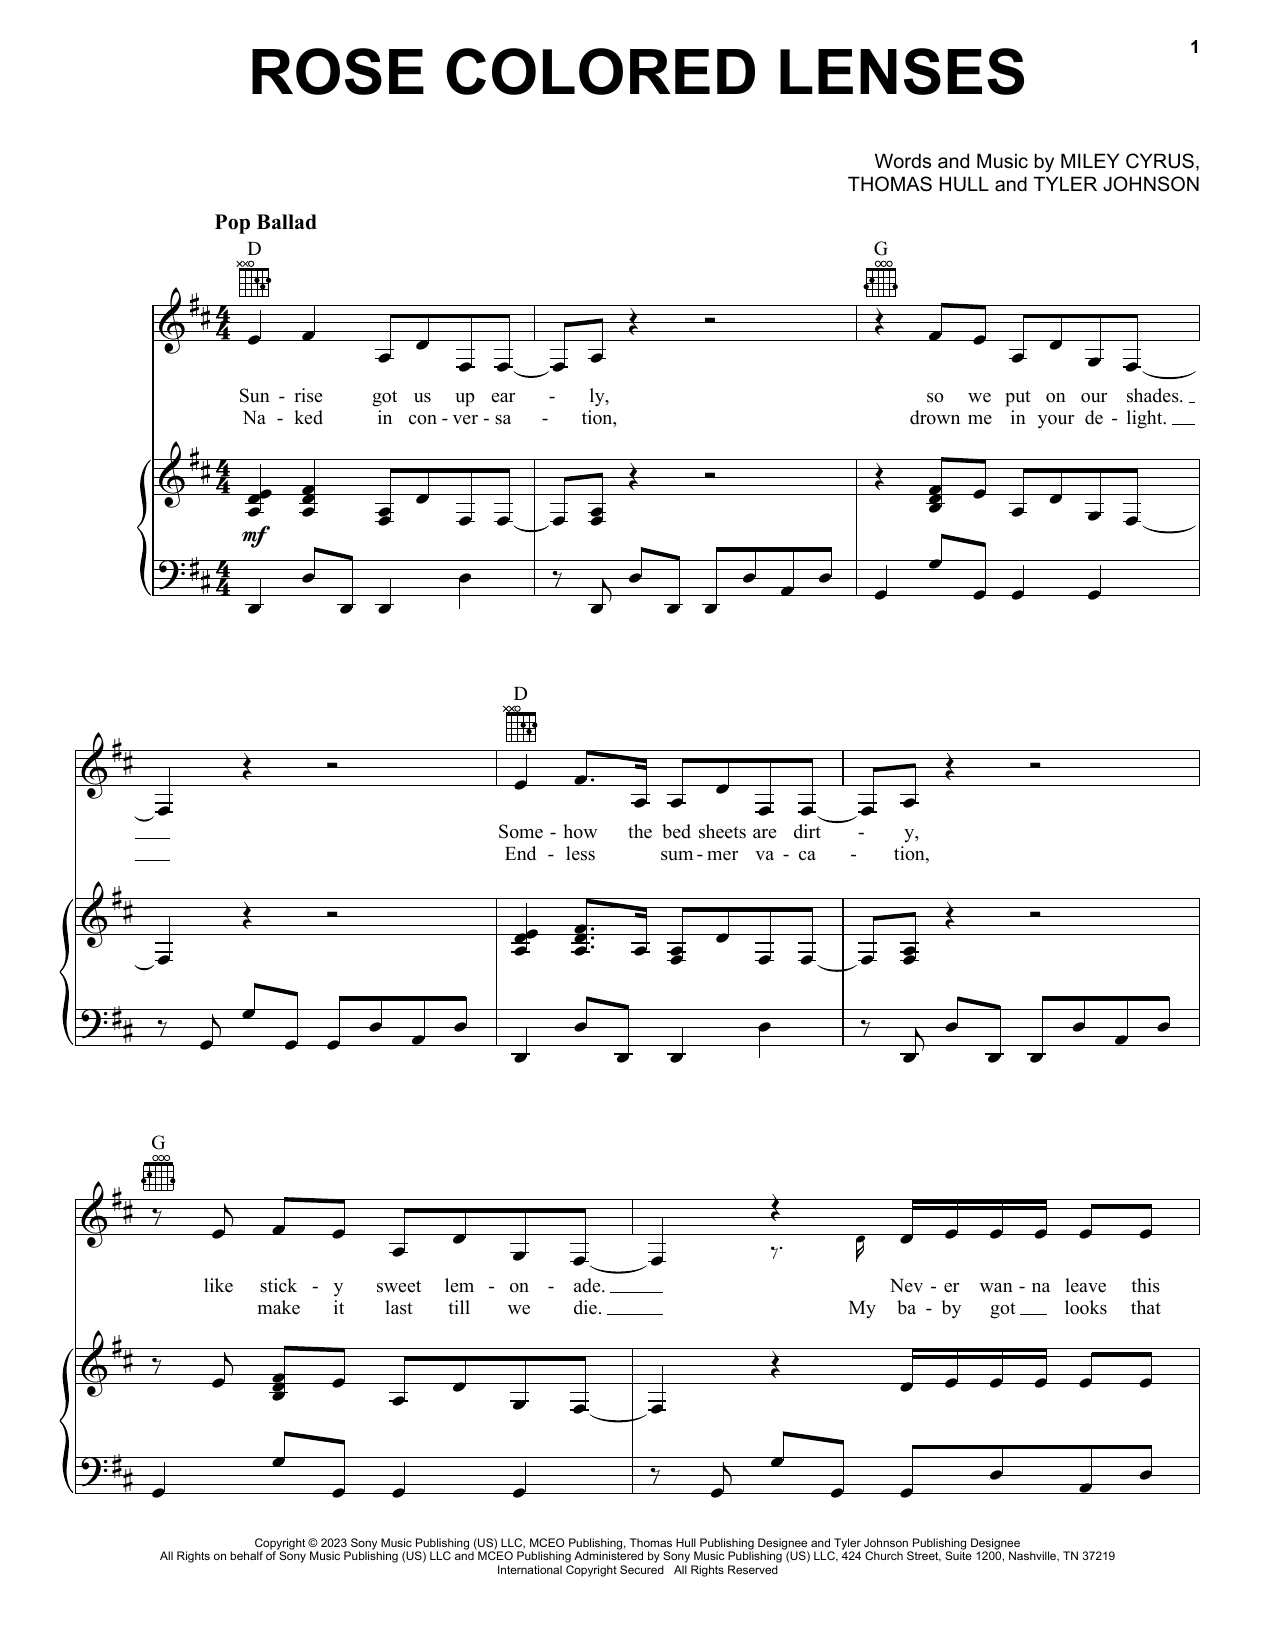 Download Miley Cyrus Rose Colored Lenses Sheet Music